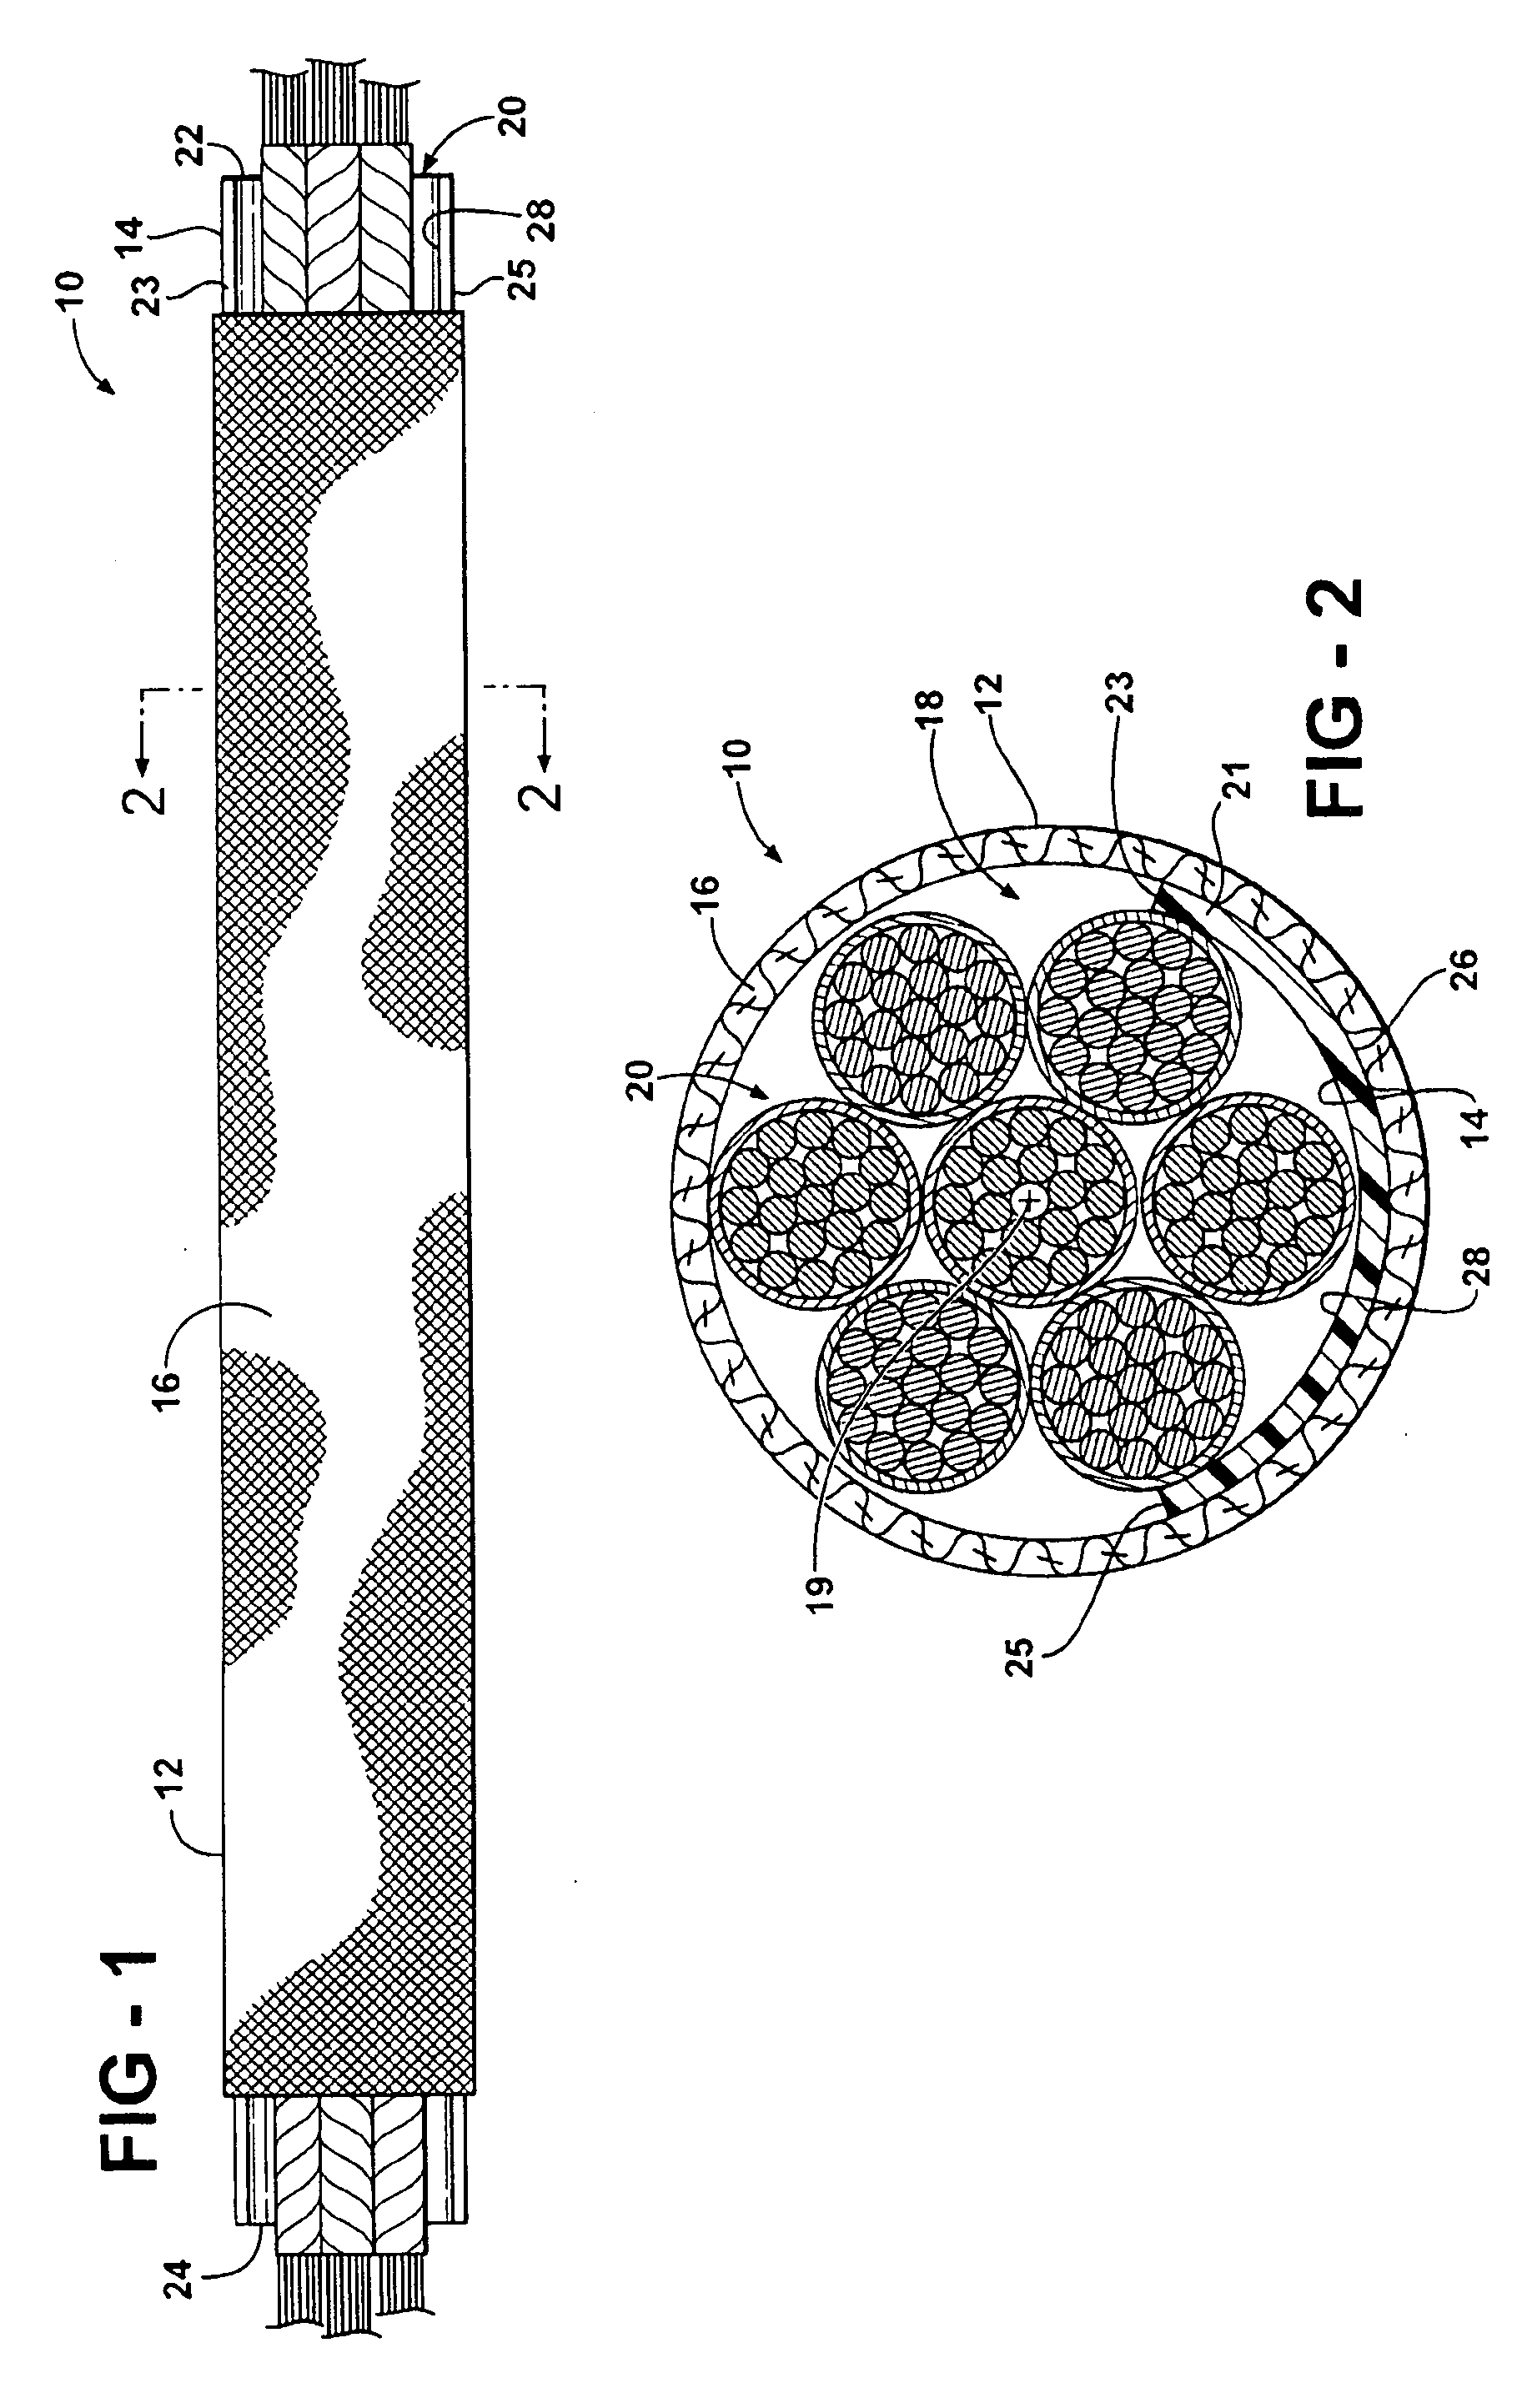 Protective sleeve assembly having a support member and method of construction